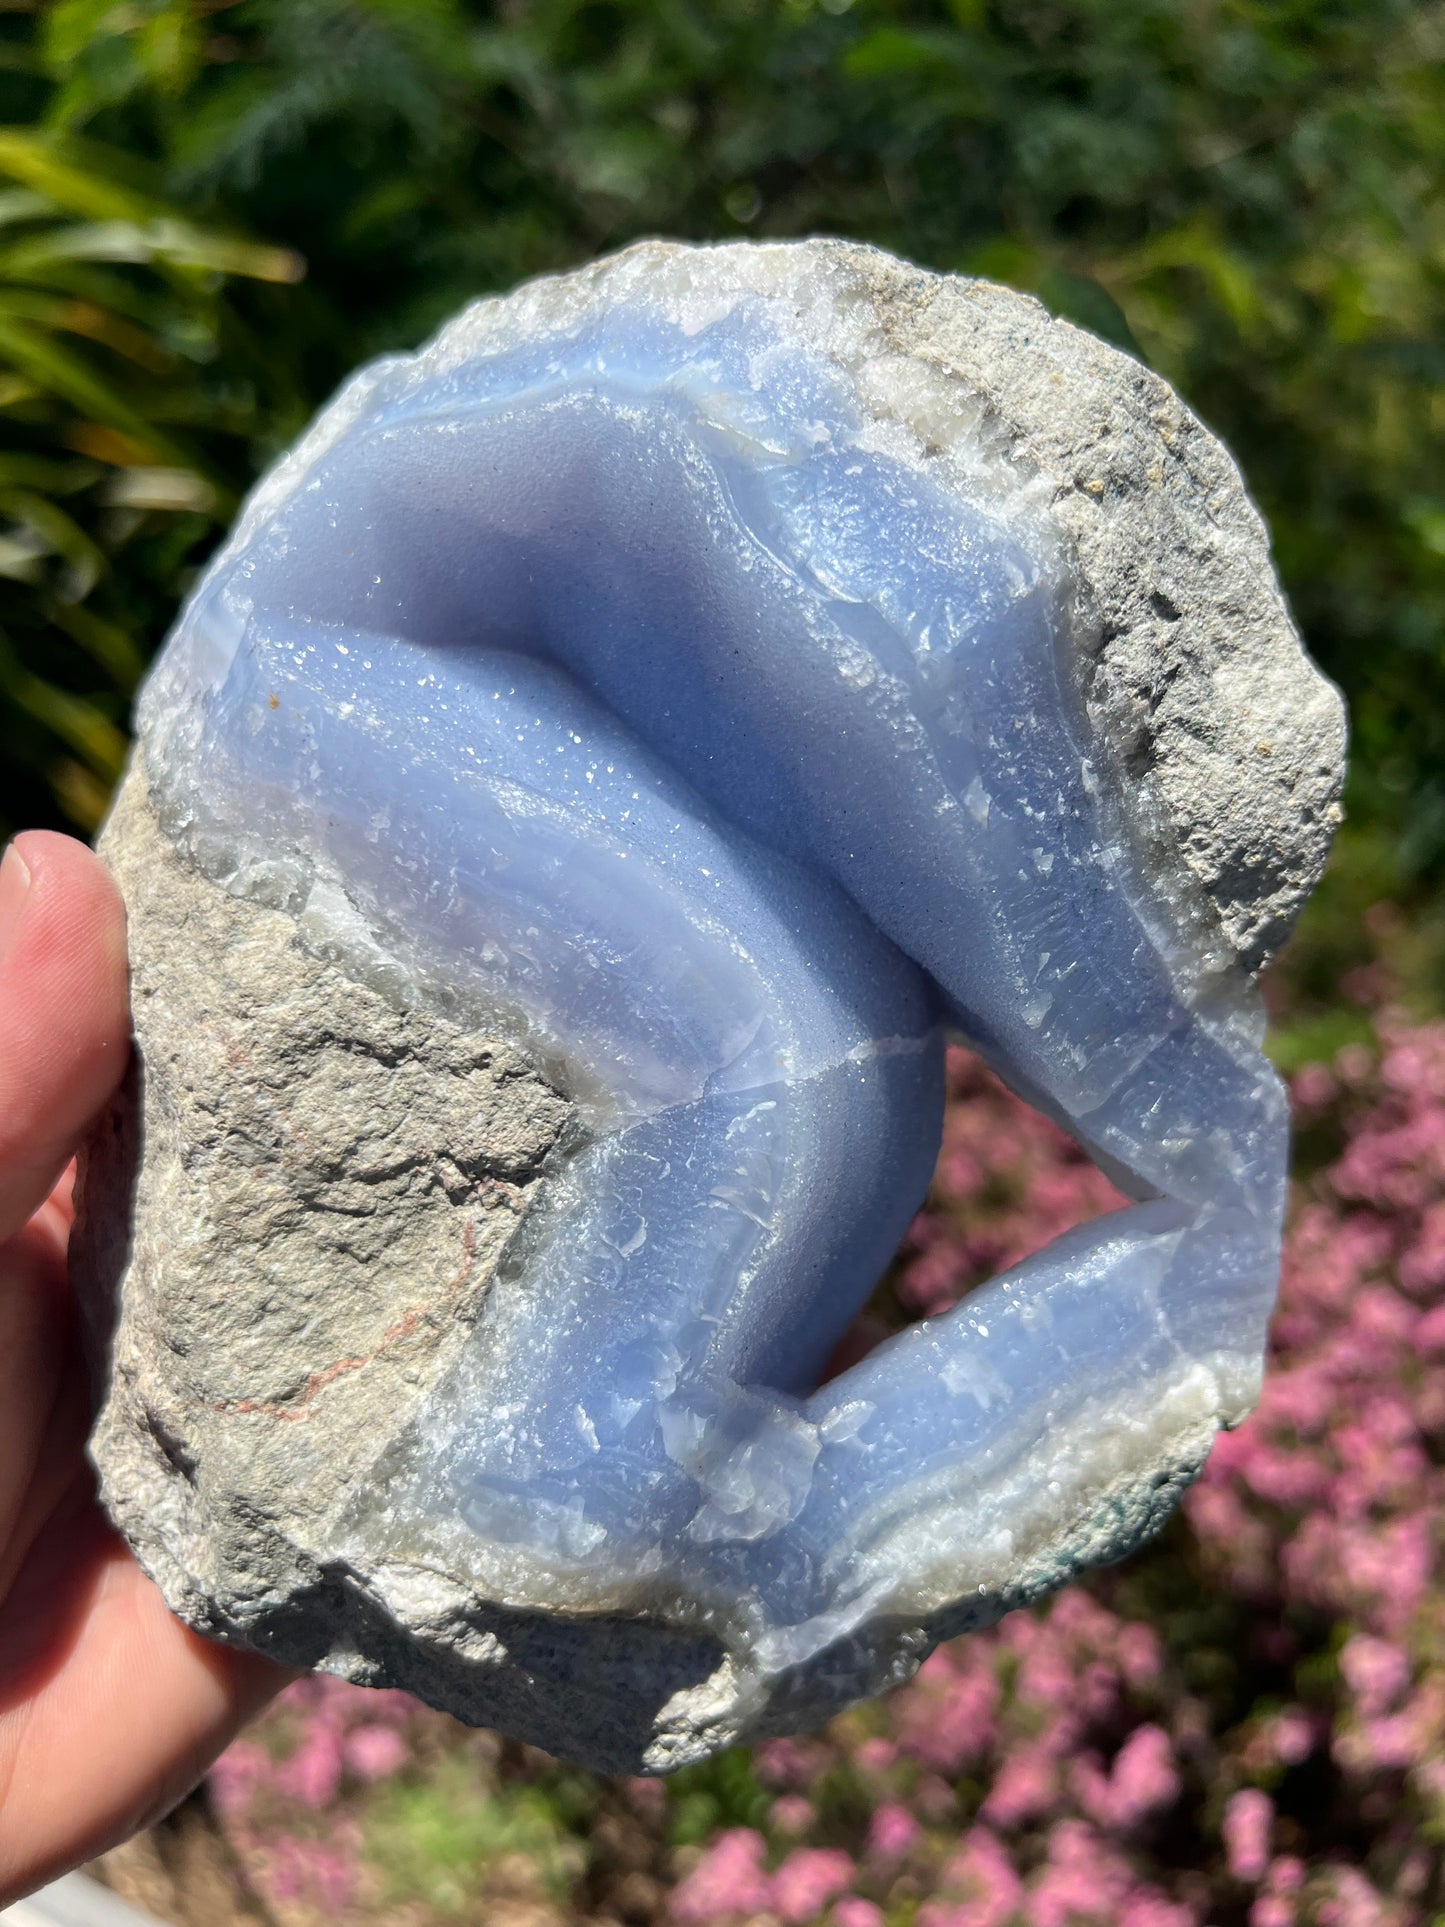 Blue lace Agate, large raw piece